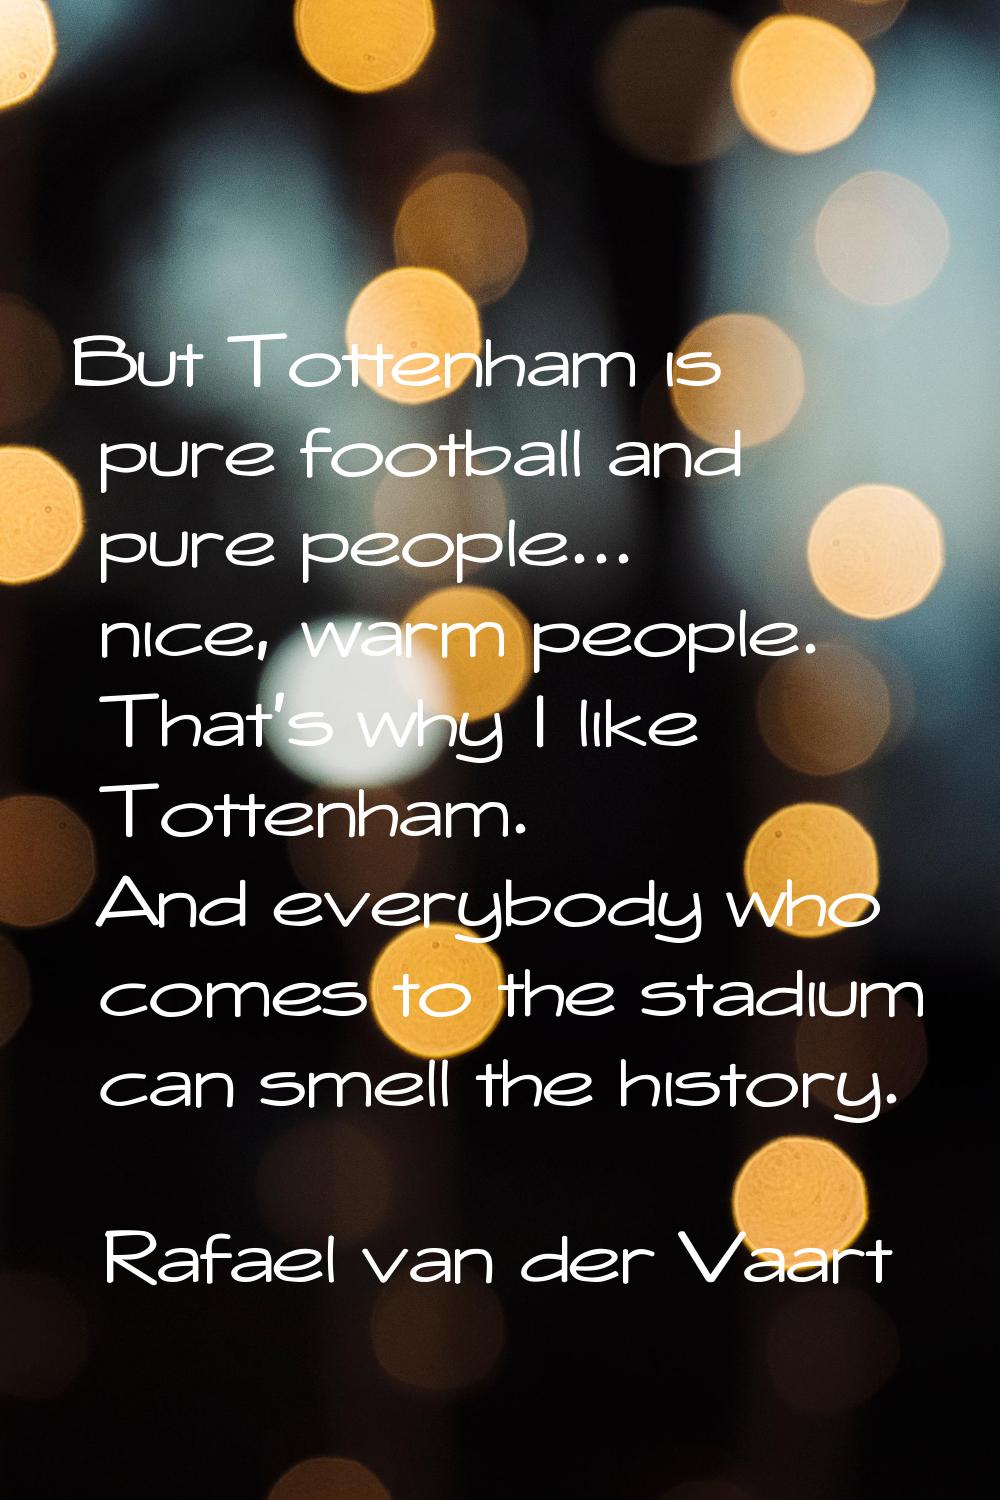 But Tottenham is pure football and pure people... nice, warm people. That's why I like Tottenham. A